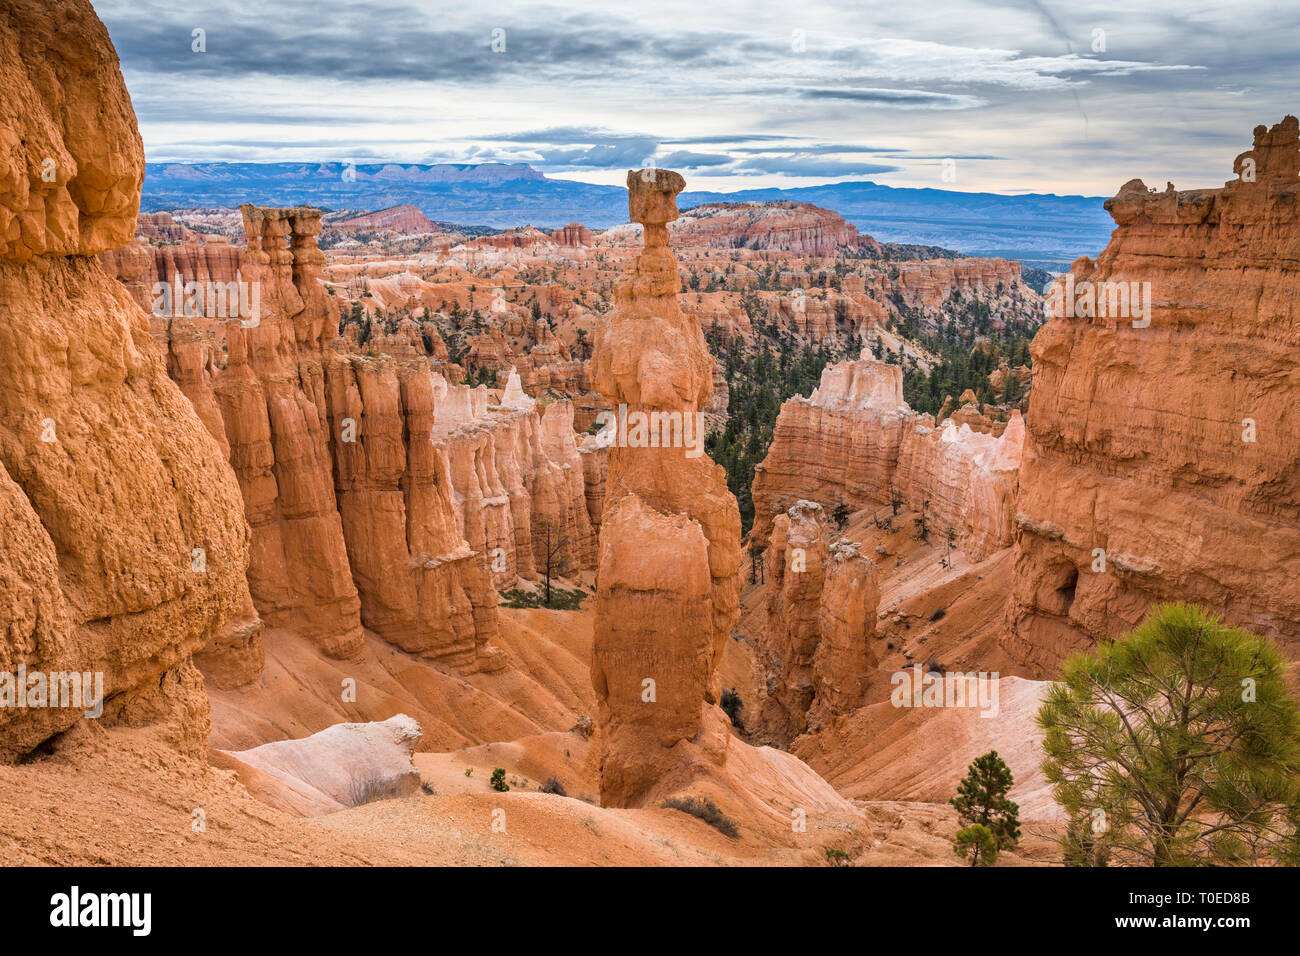 Bryce Canyon National Park, Utah, USA au Thor's Hammer. Banque D'Images